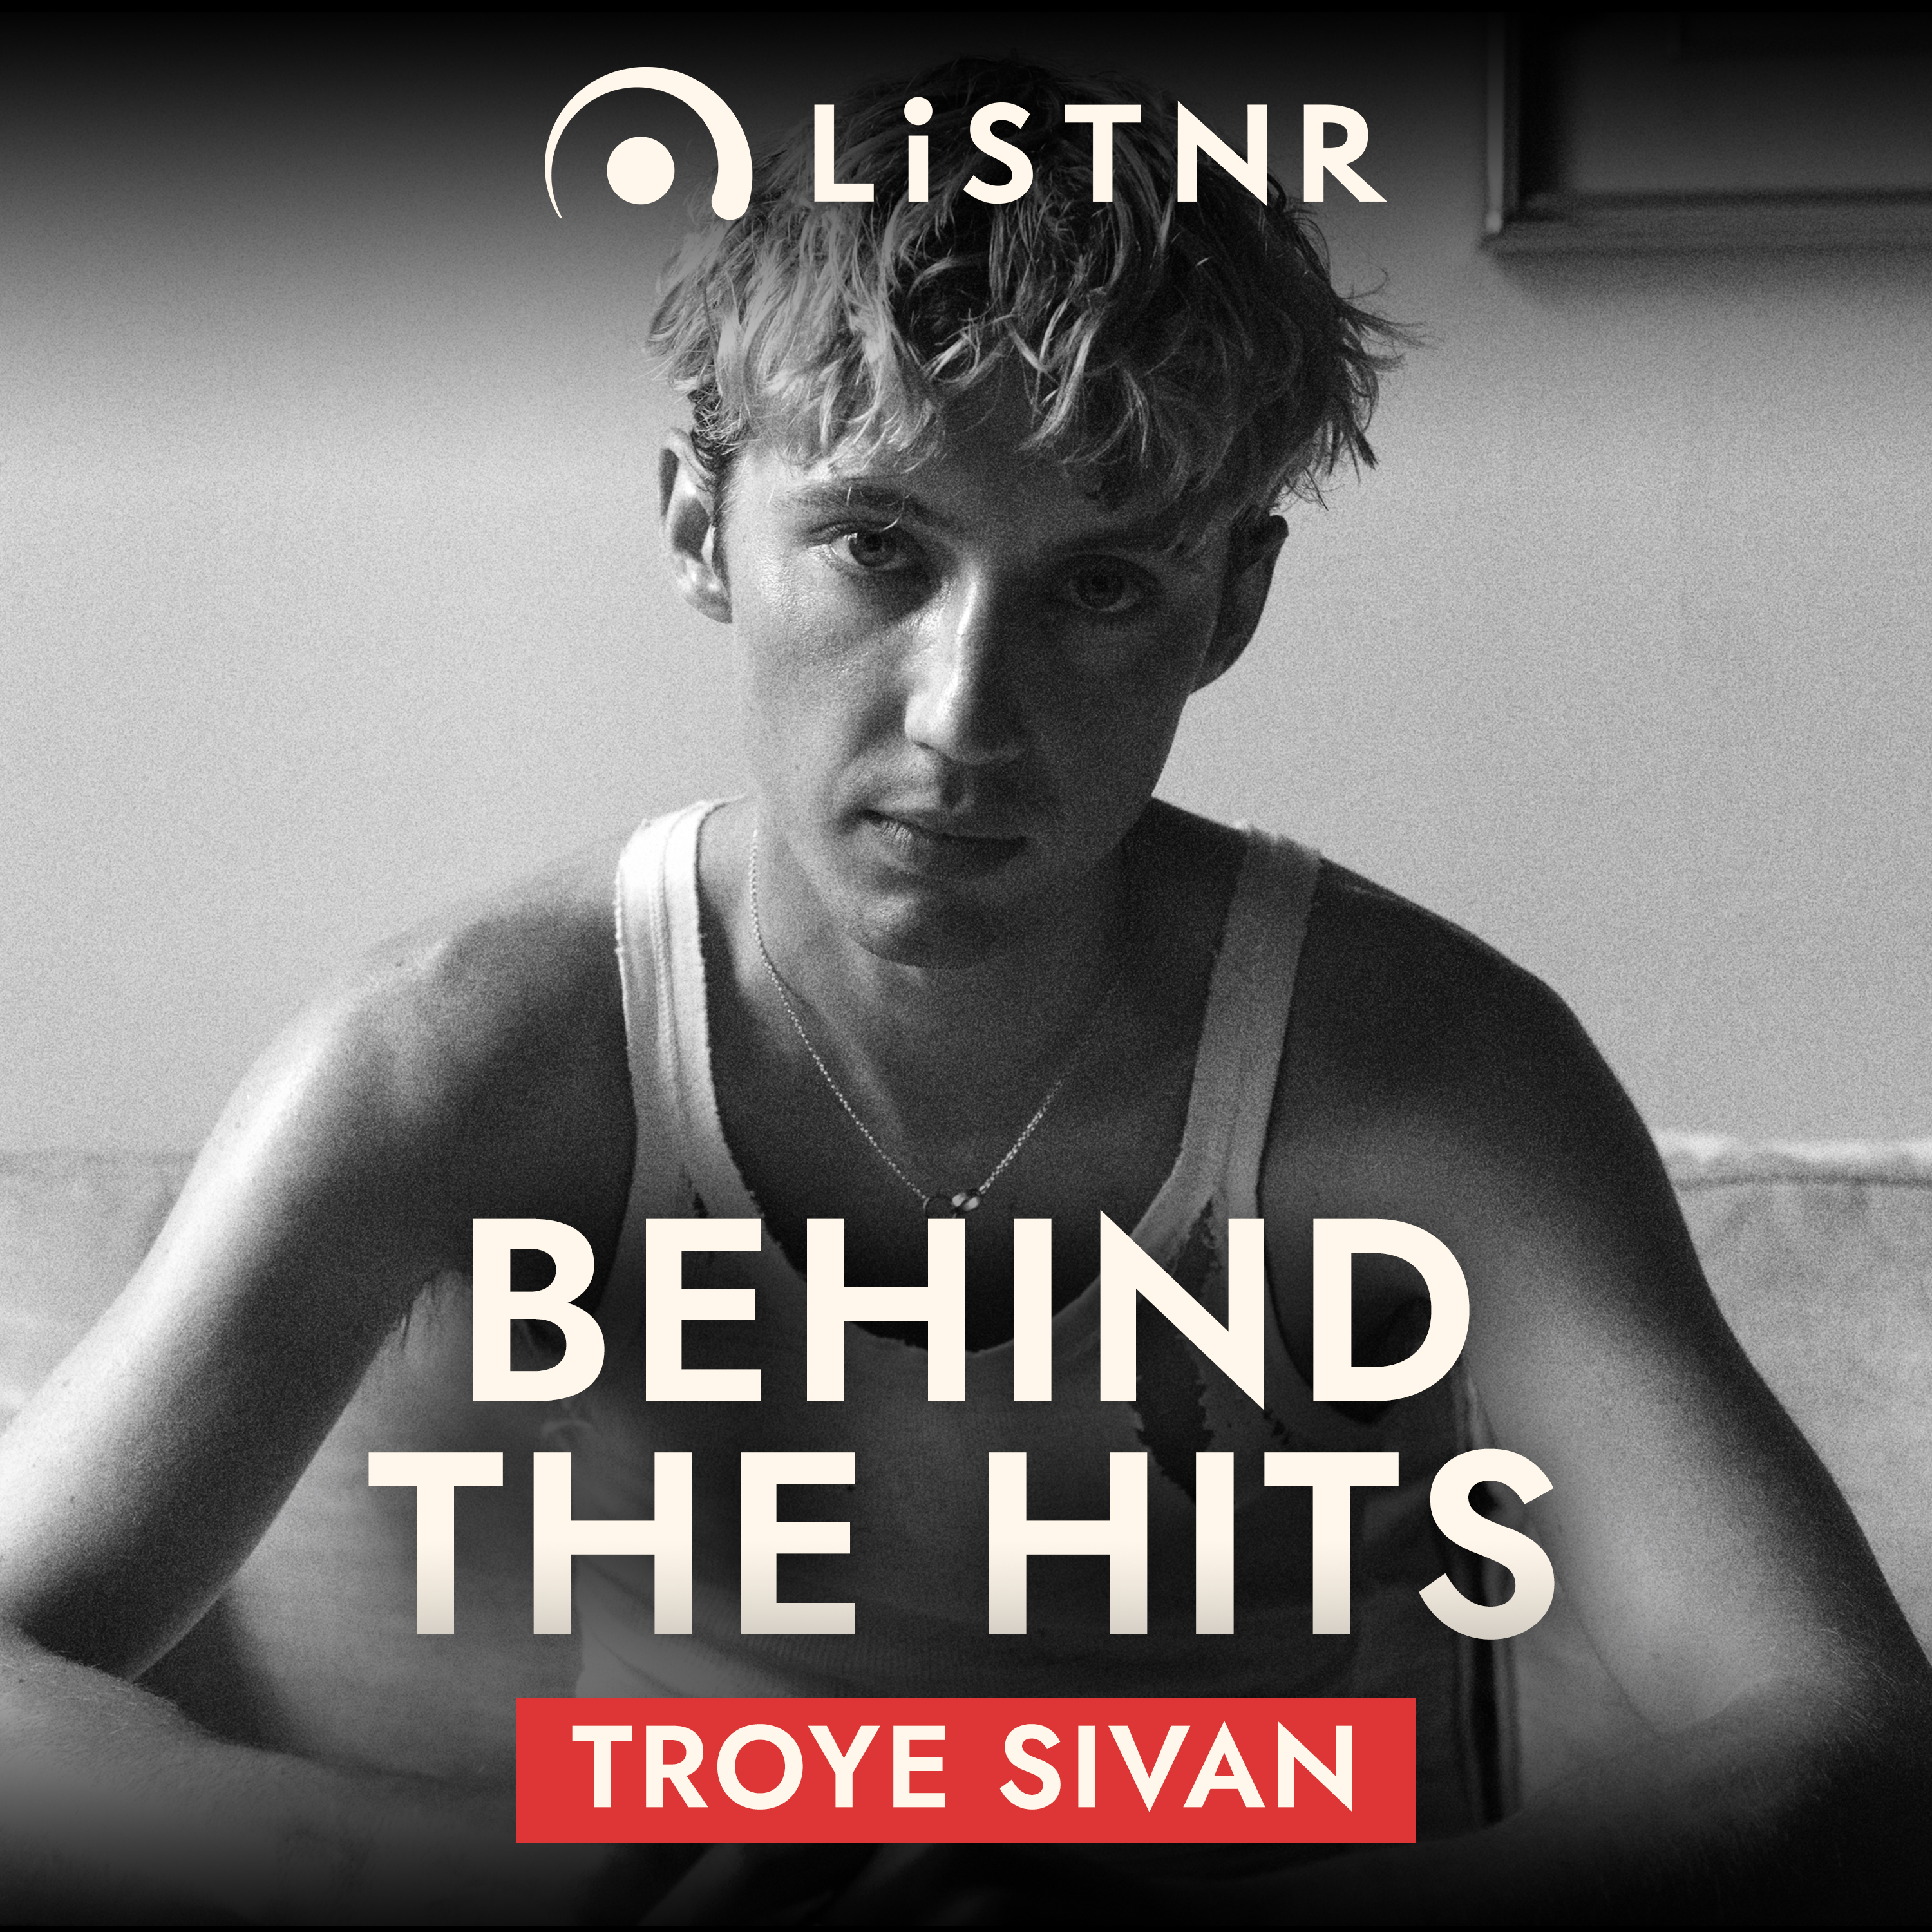 Troye Sivan: Sex, Censorship & Self-Acceptance cover image